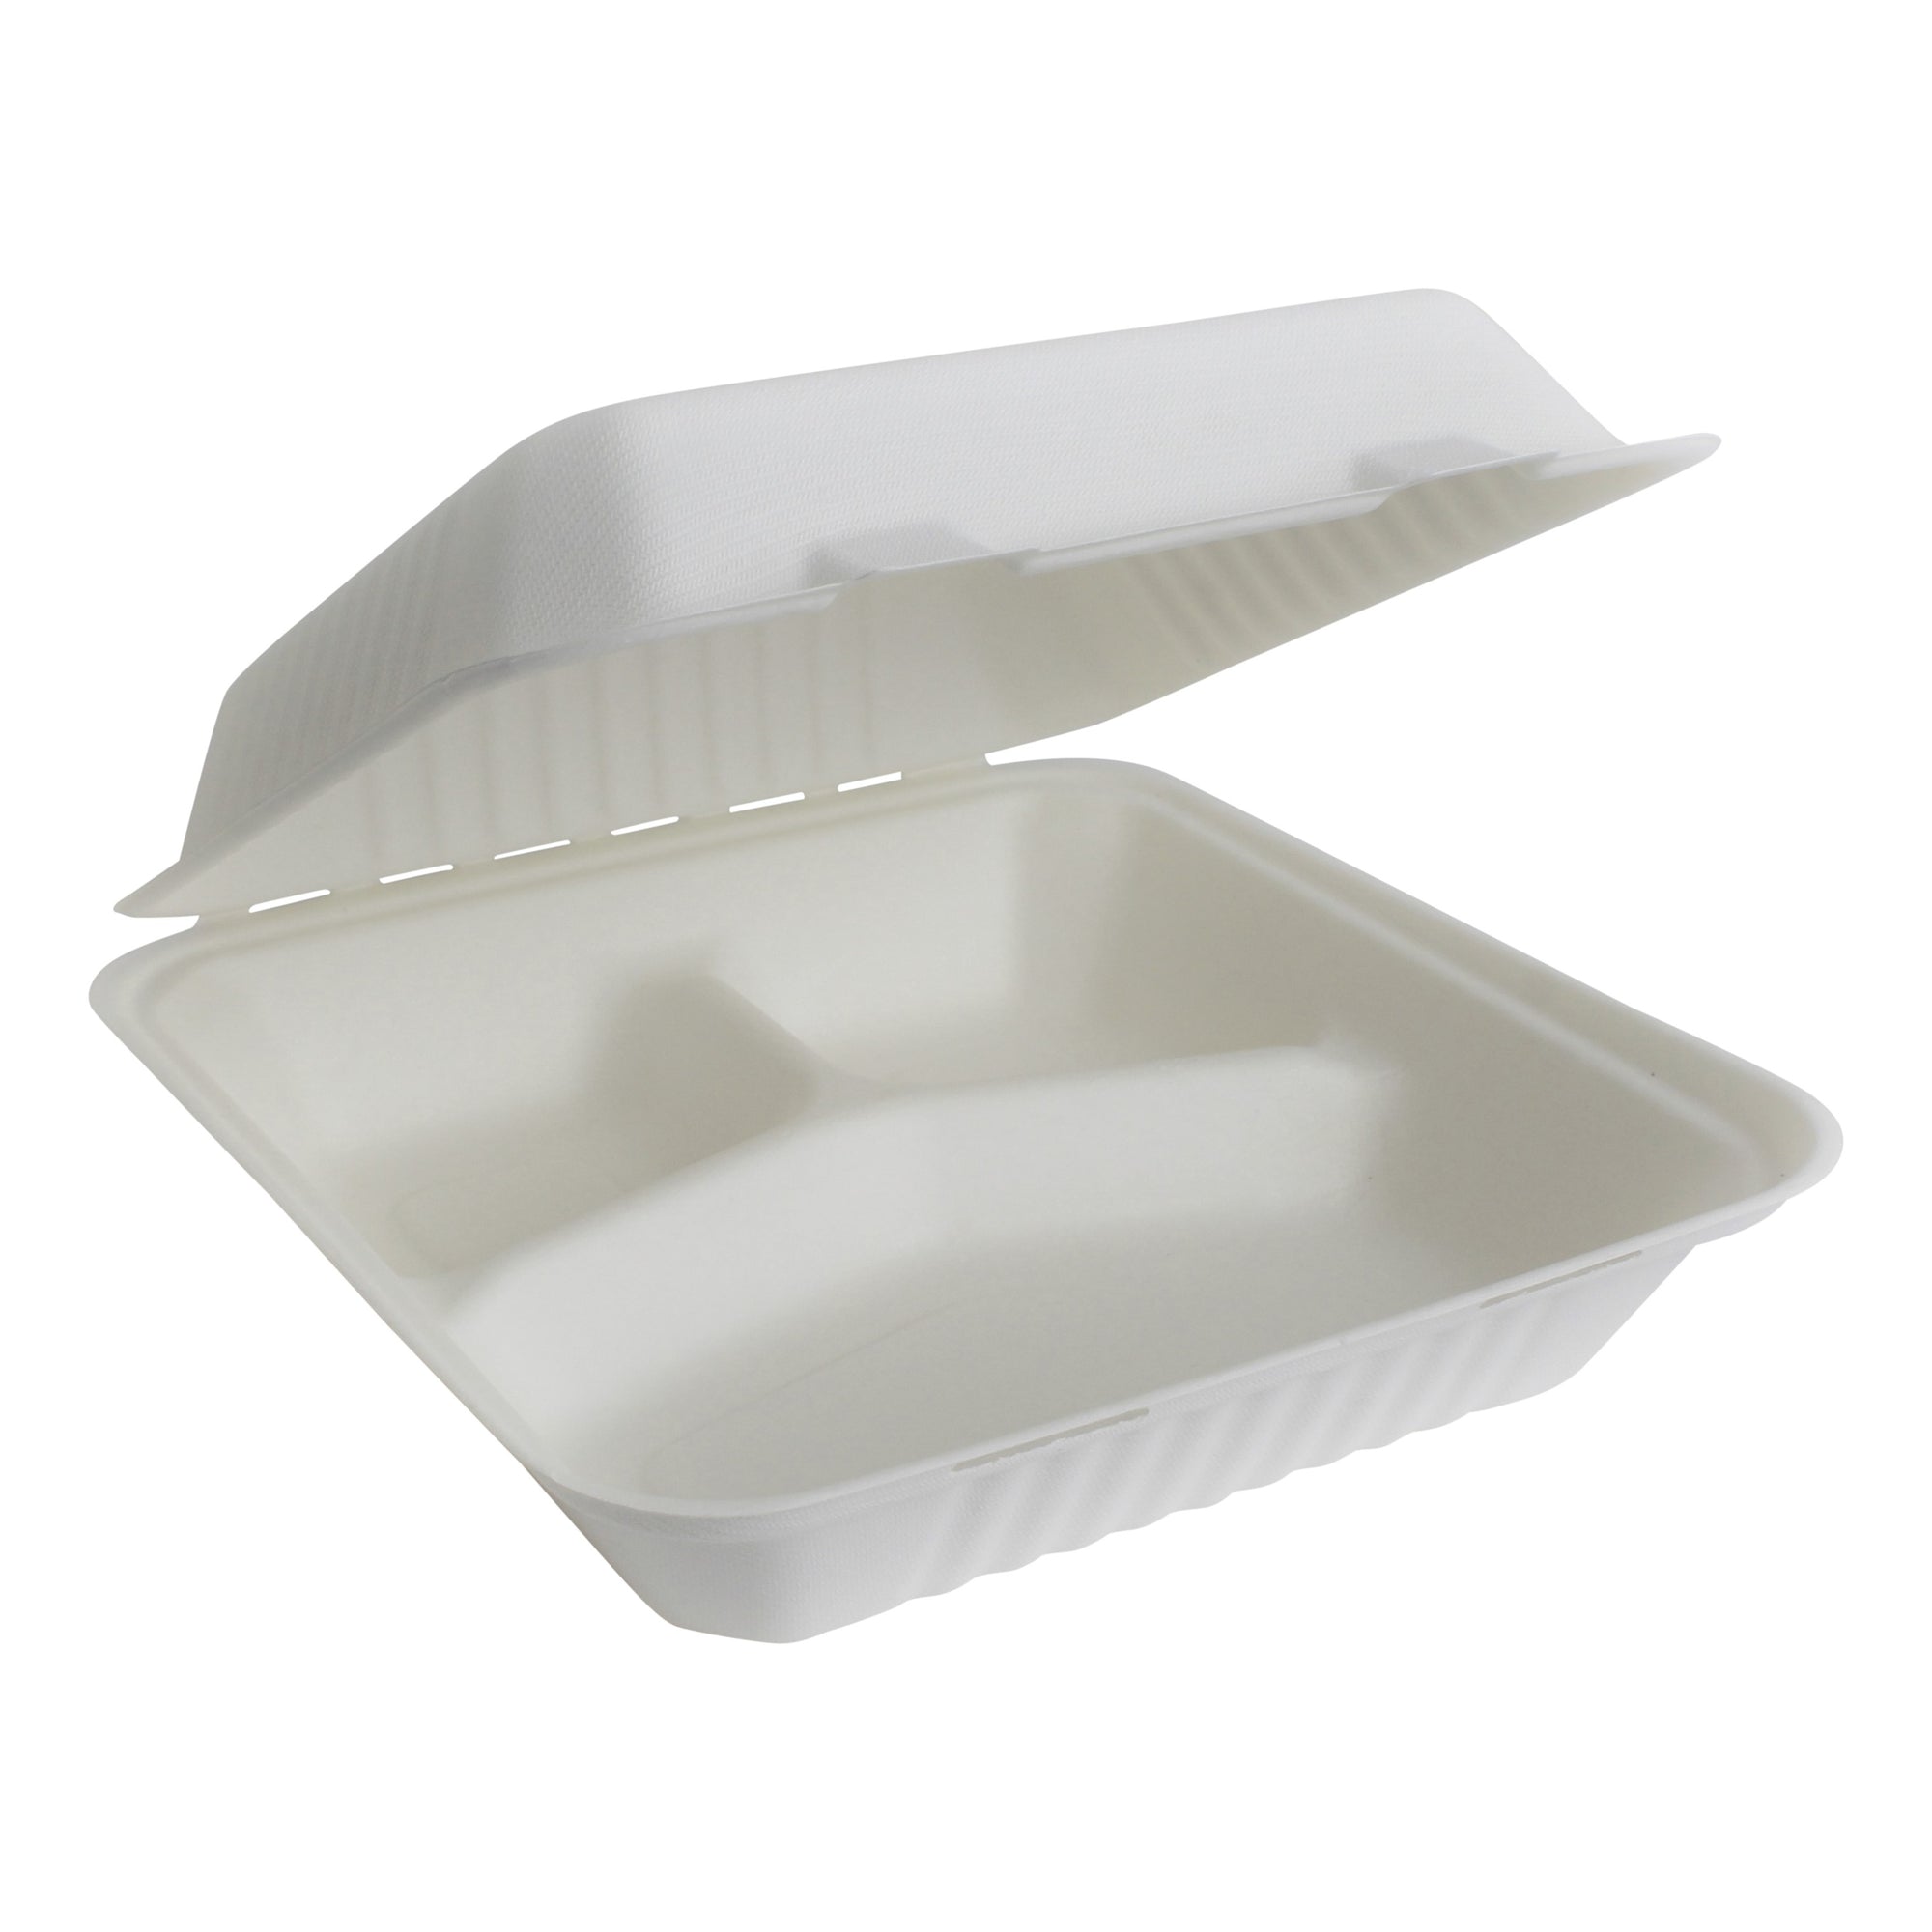 https://brheez.com/cdn/shop/products/Brheez_9x9x3_Biodegradable_Compostable_Sugarcane_Bagasse_3_Compartment_Takeout_Container_2_1547154762257_2000x.jpg?v=1588105196